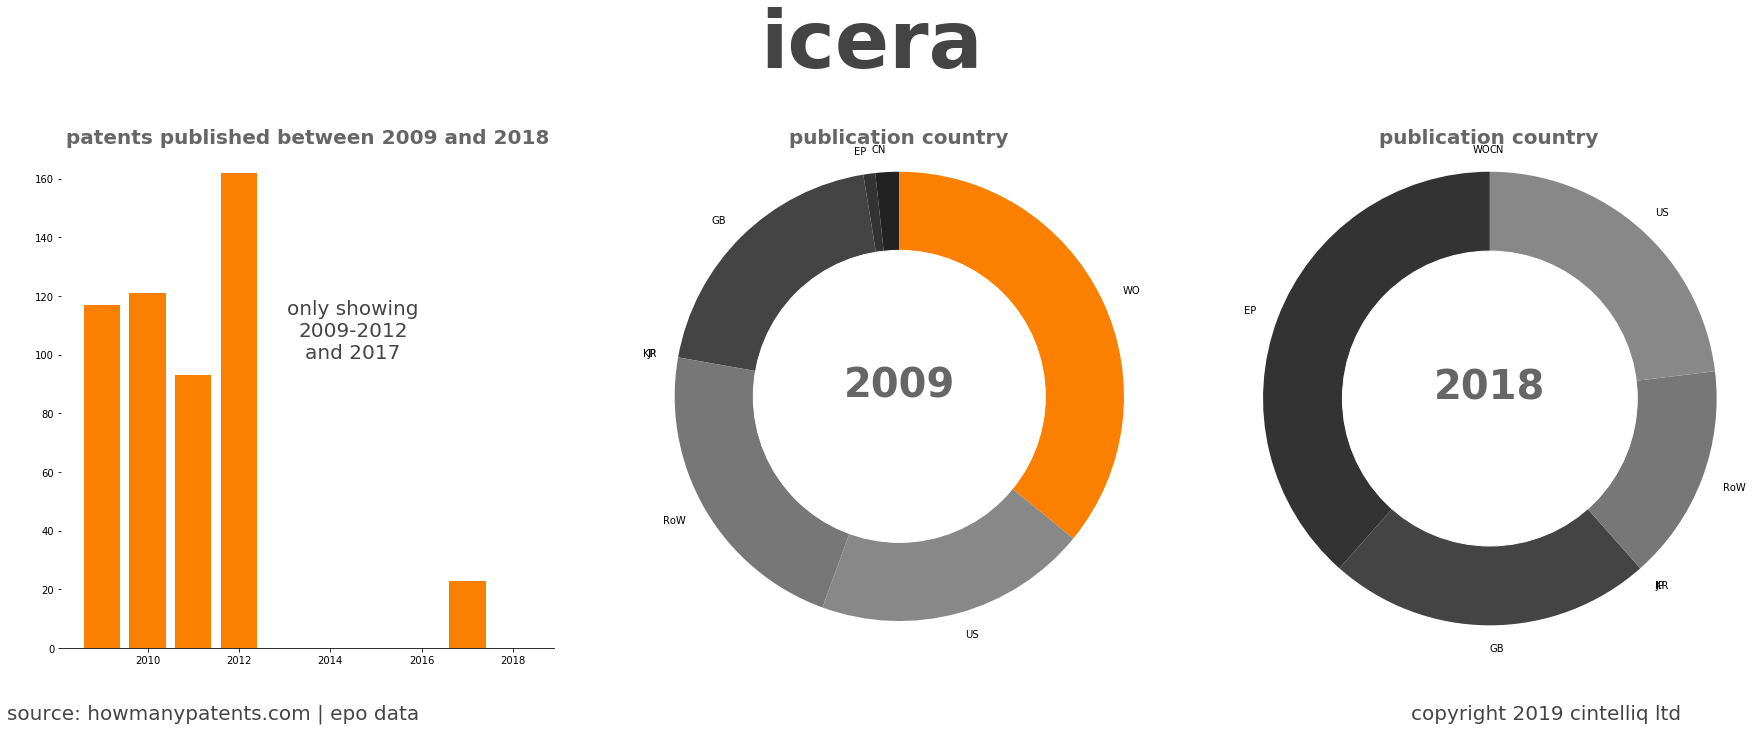 summary of patents for Icera